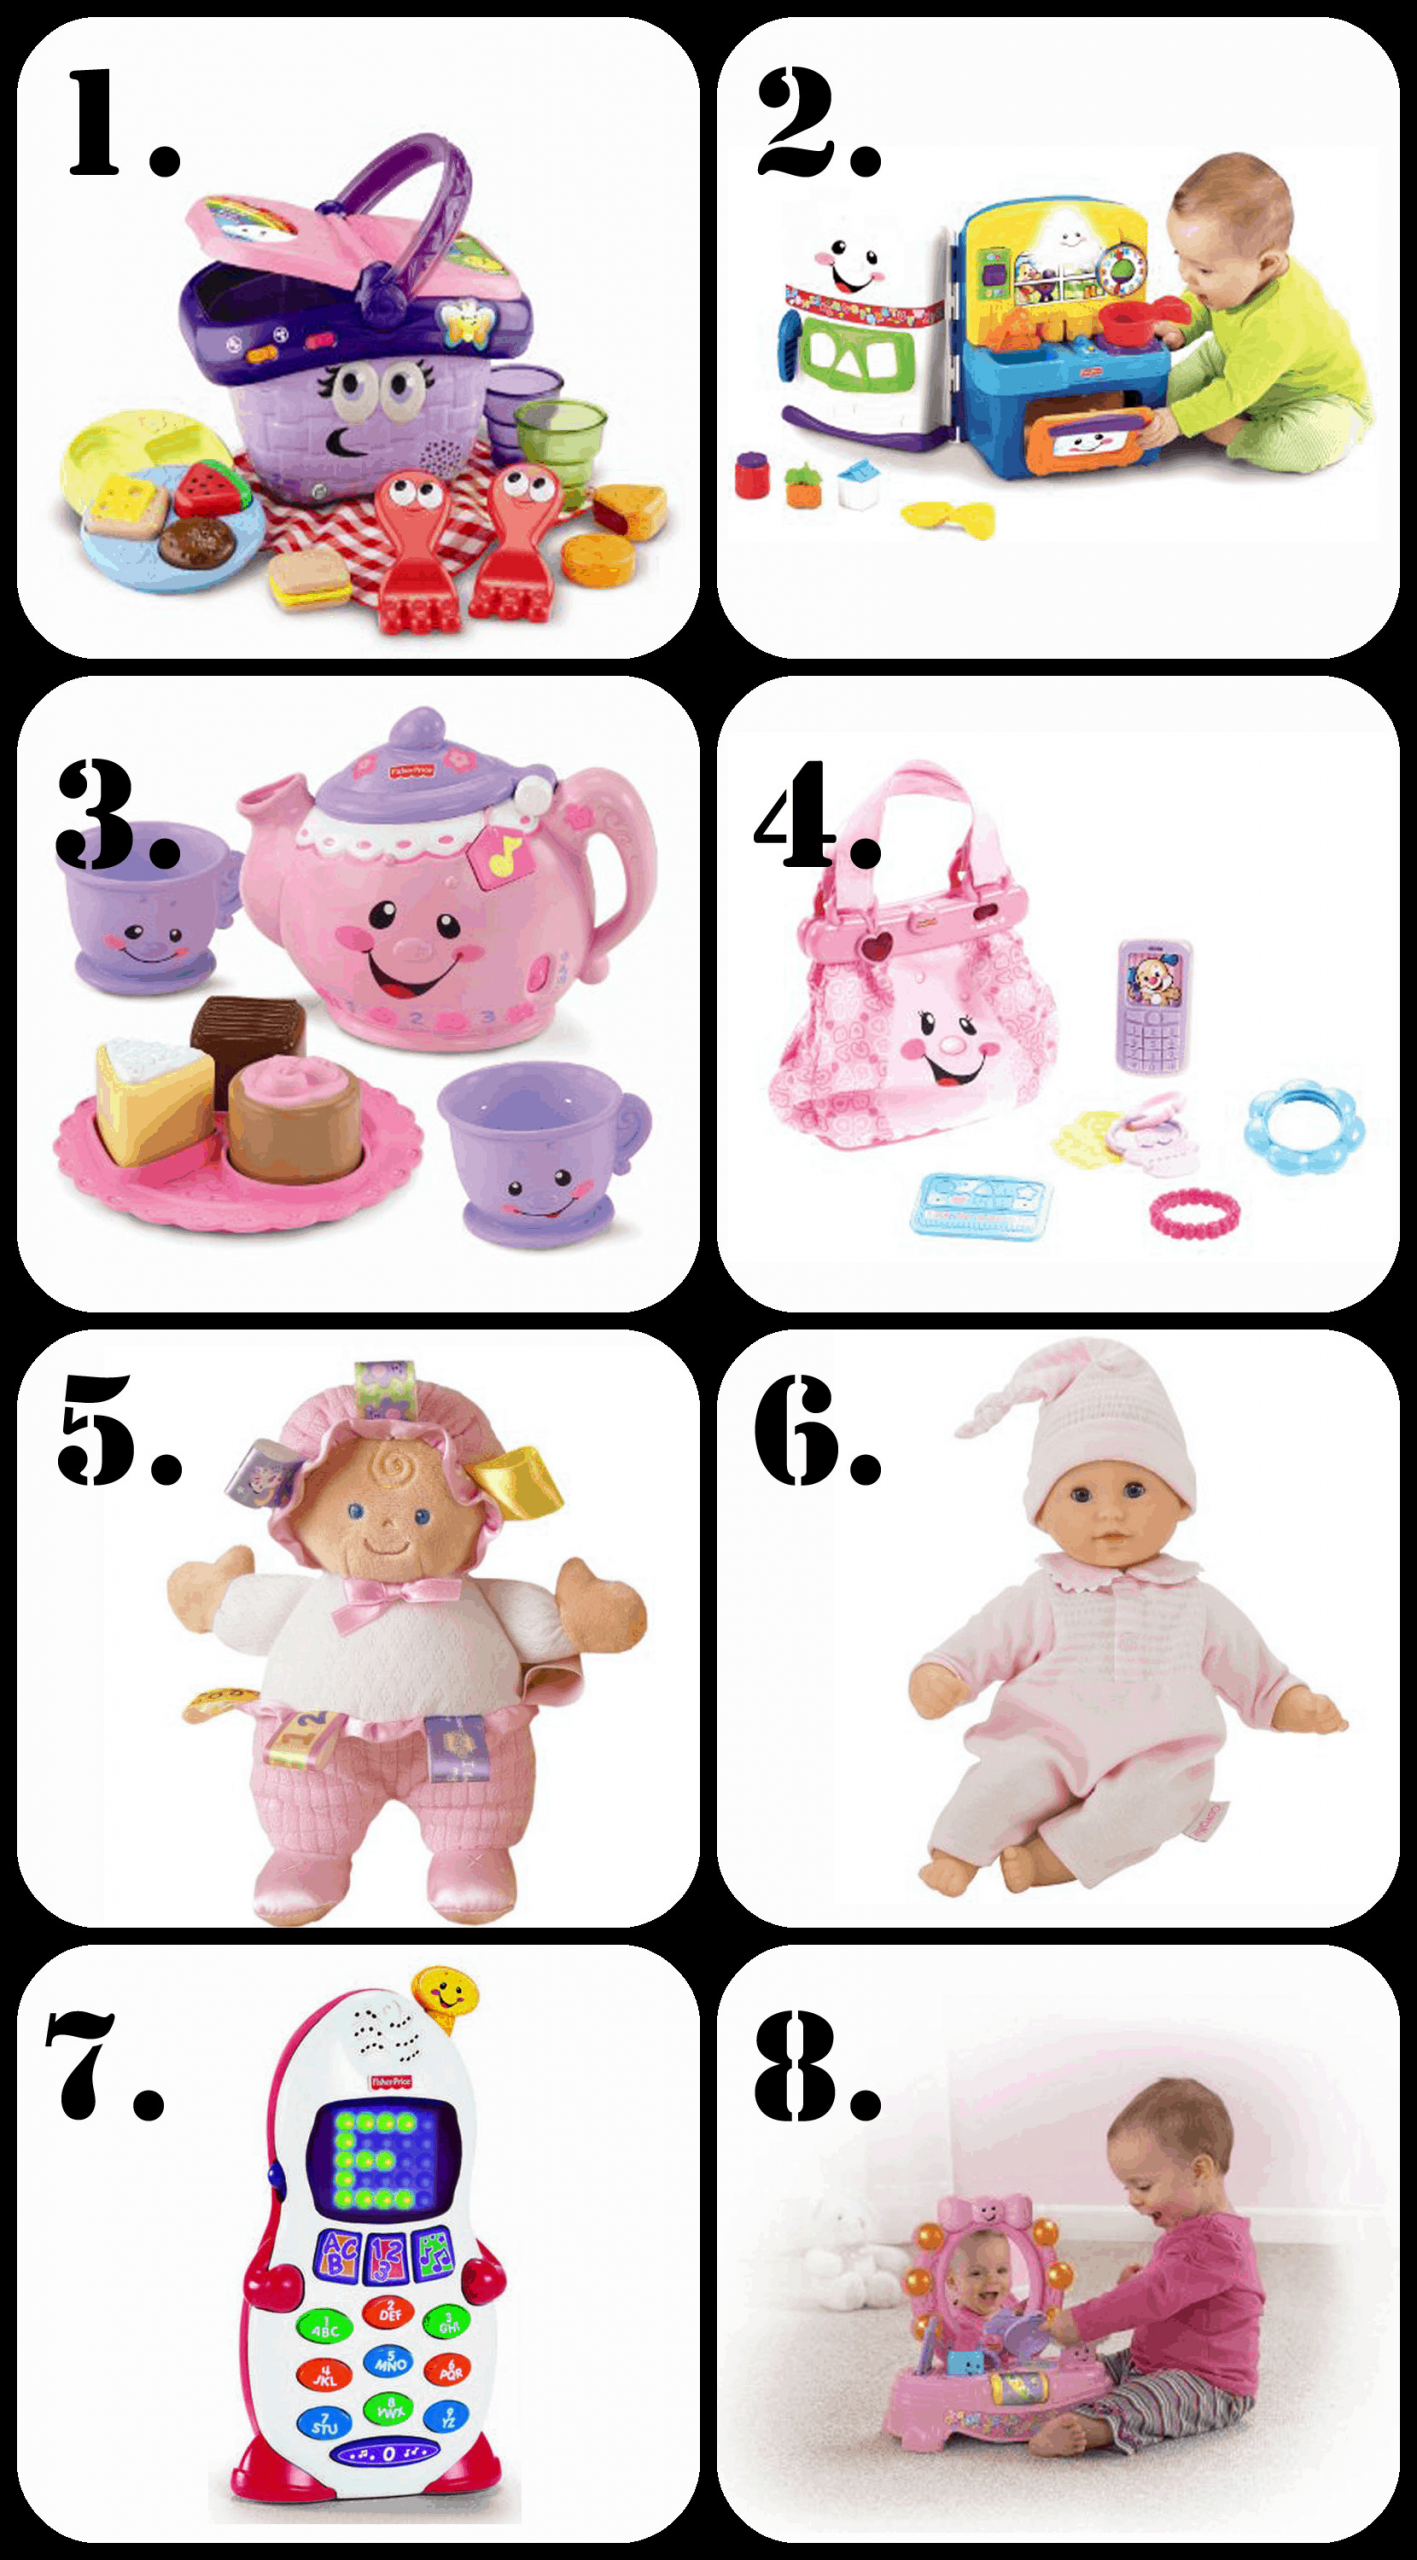 One Year Old Birthday Gifts
 The Ultimate List of Gift Ideas for a 1 Year Old Girl